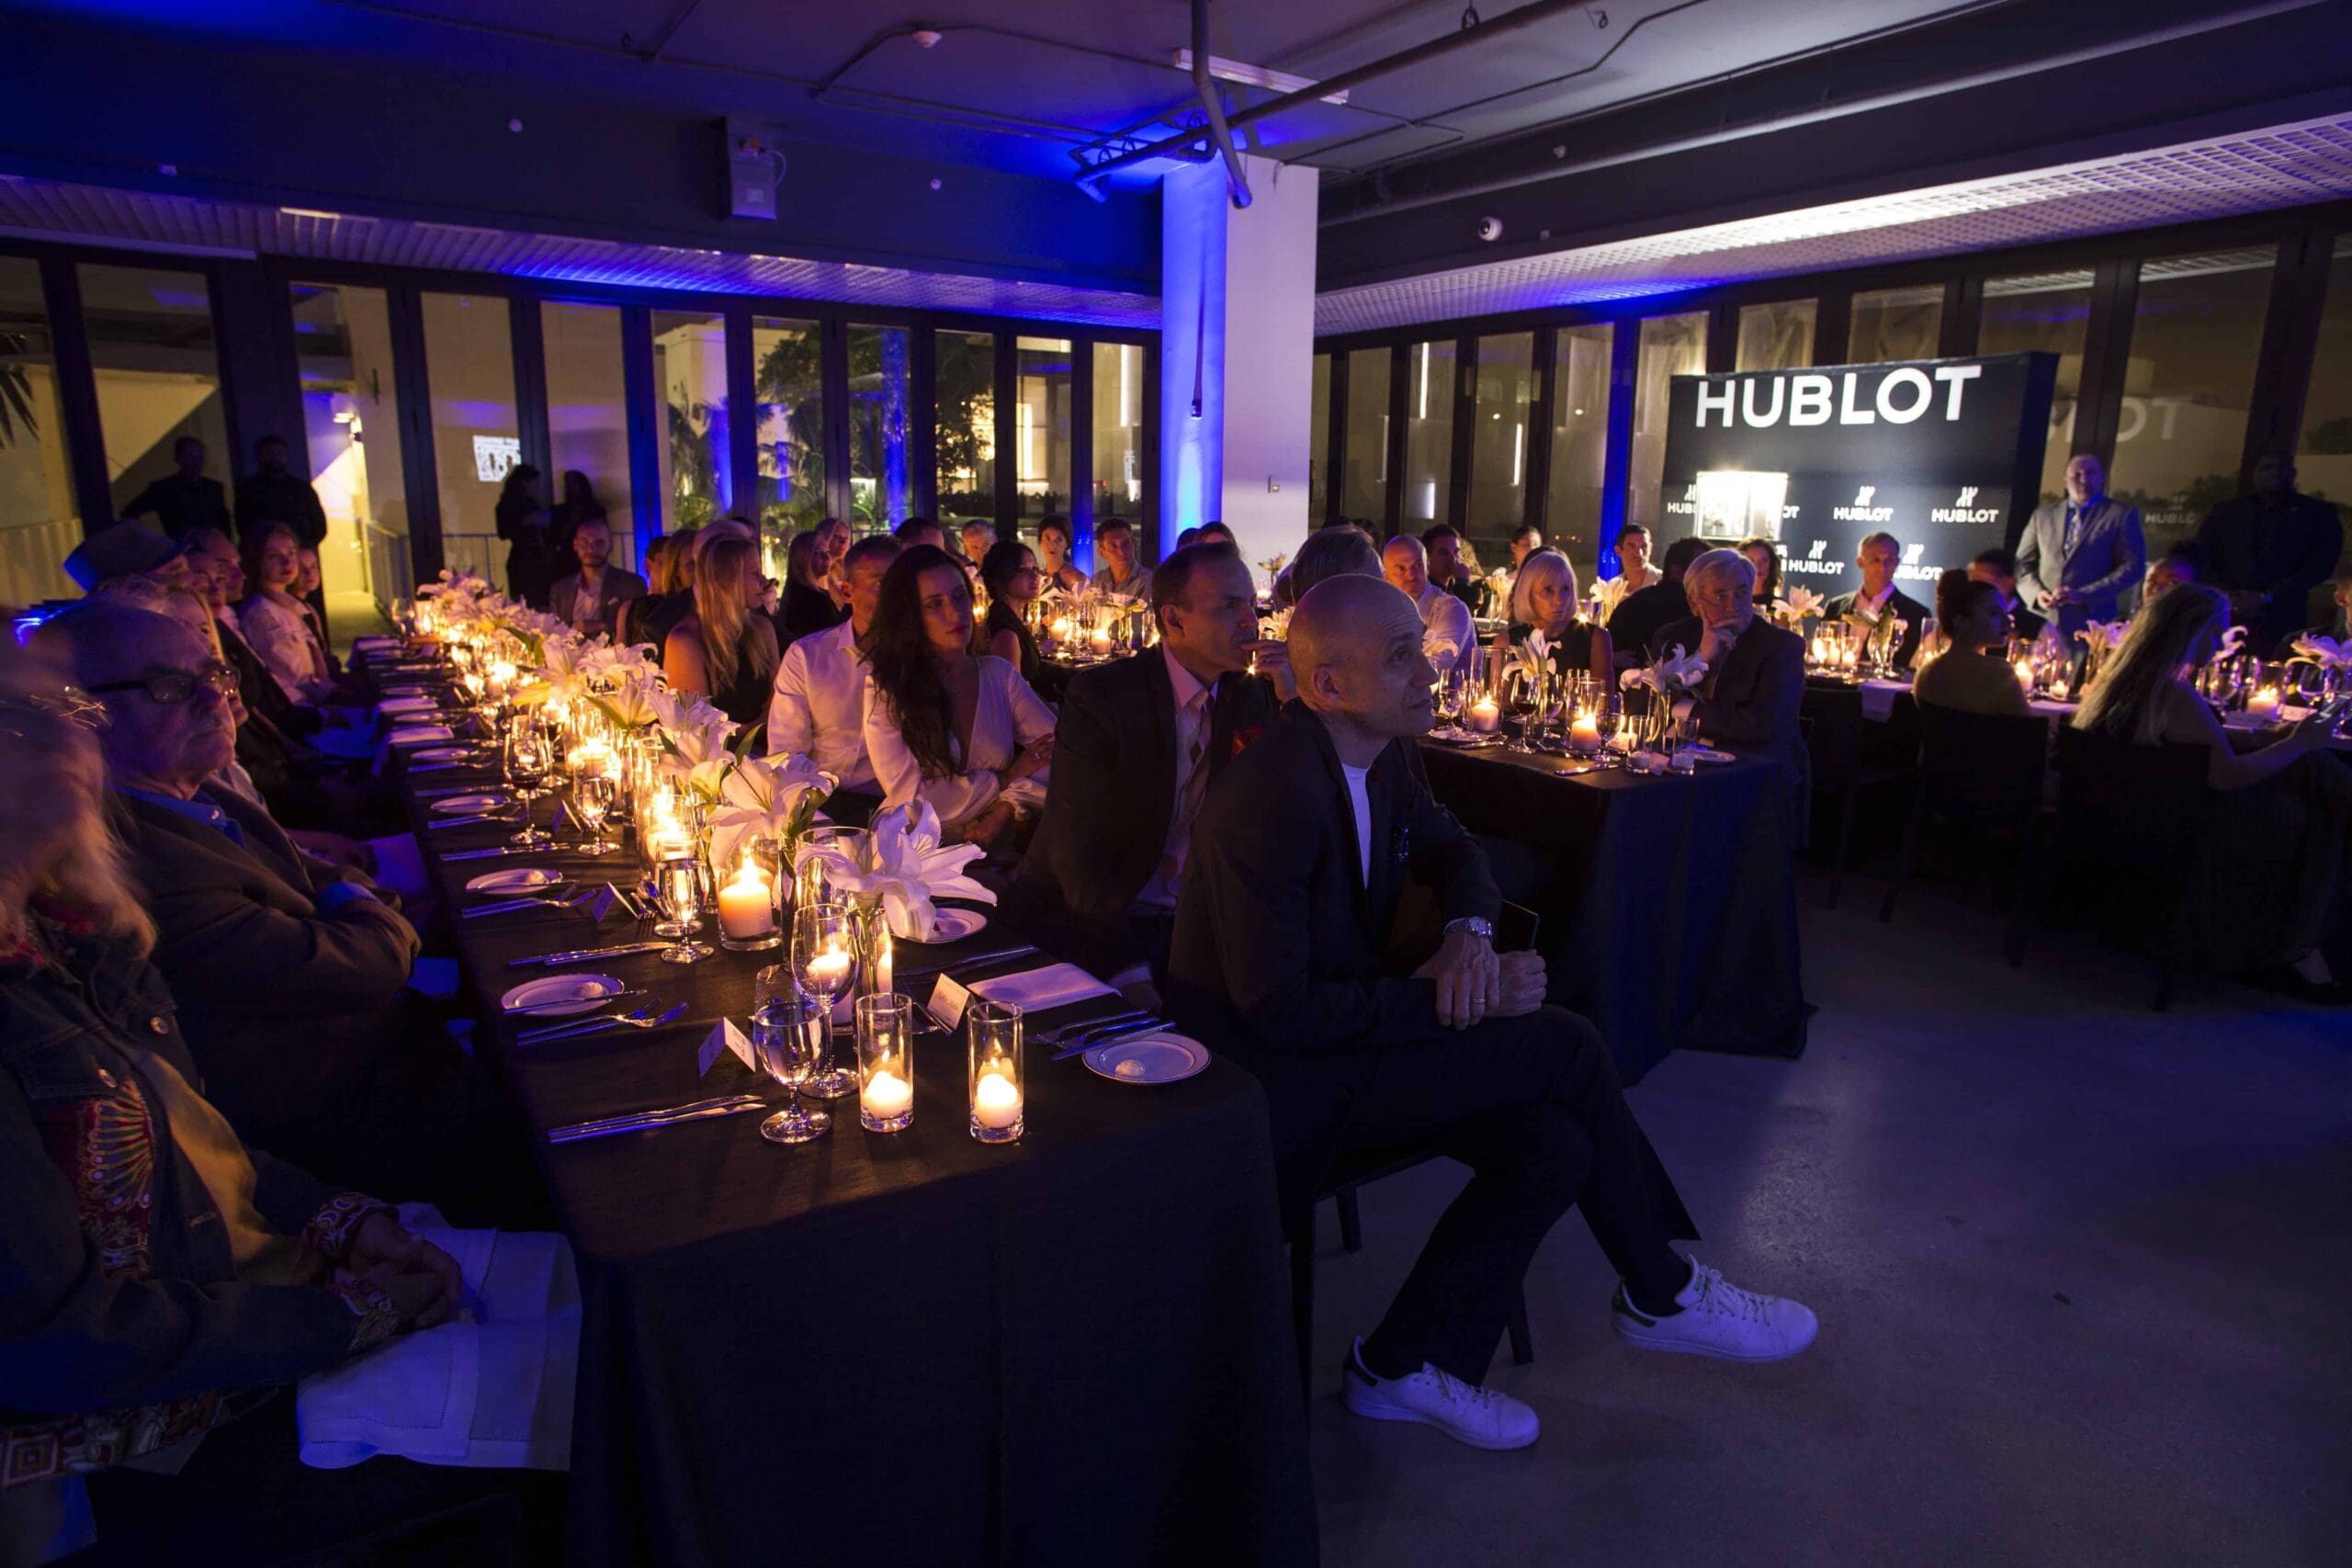 Dinner Atmosphere - What happens when Hublot and Best Buddies team up? Just watch!